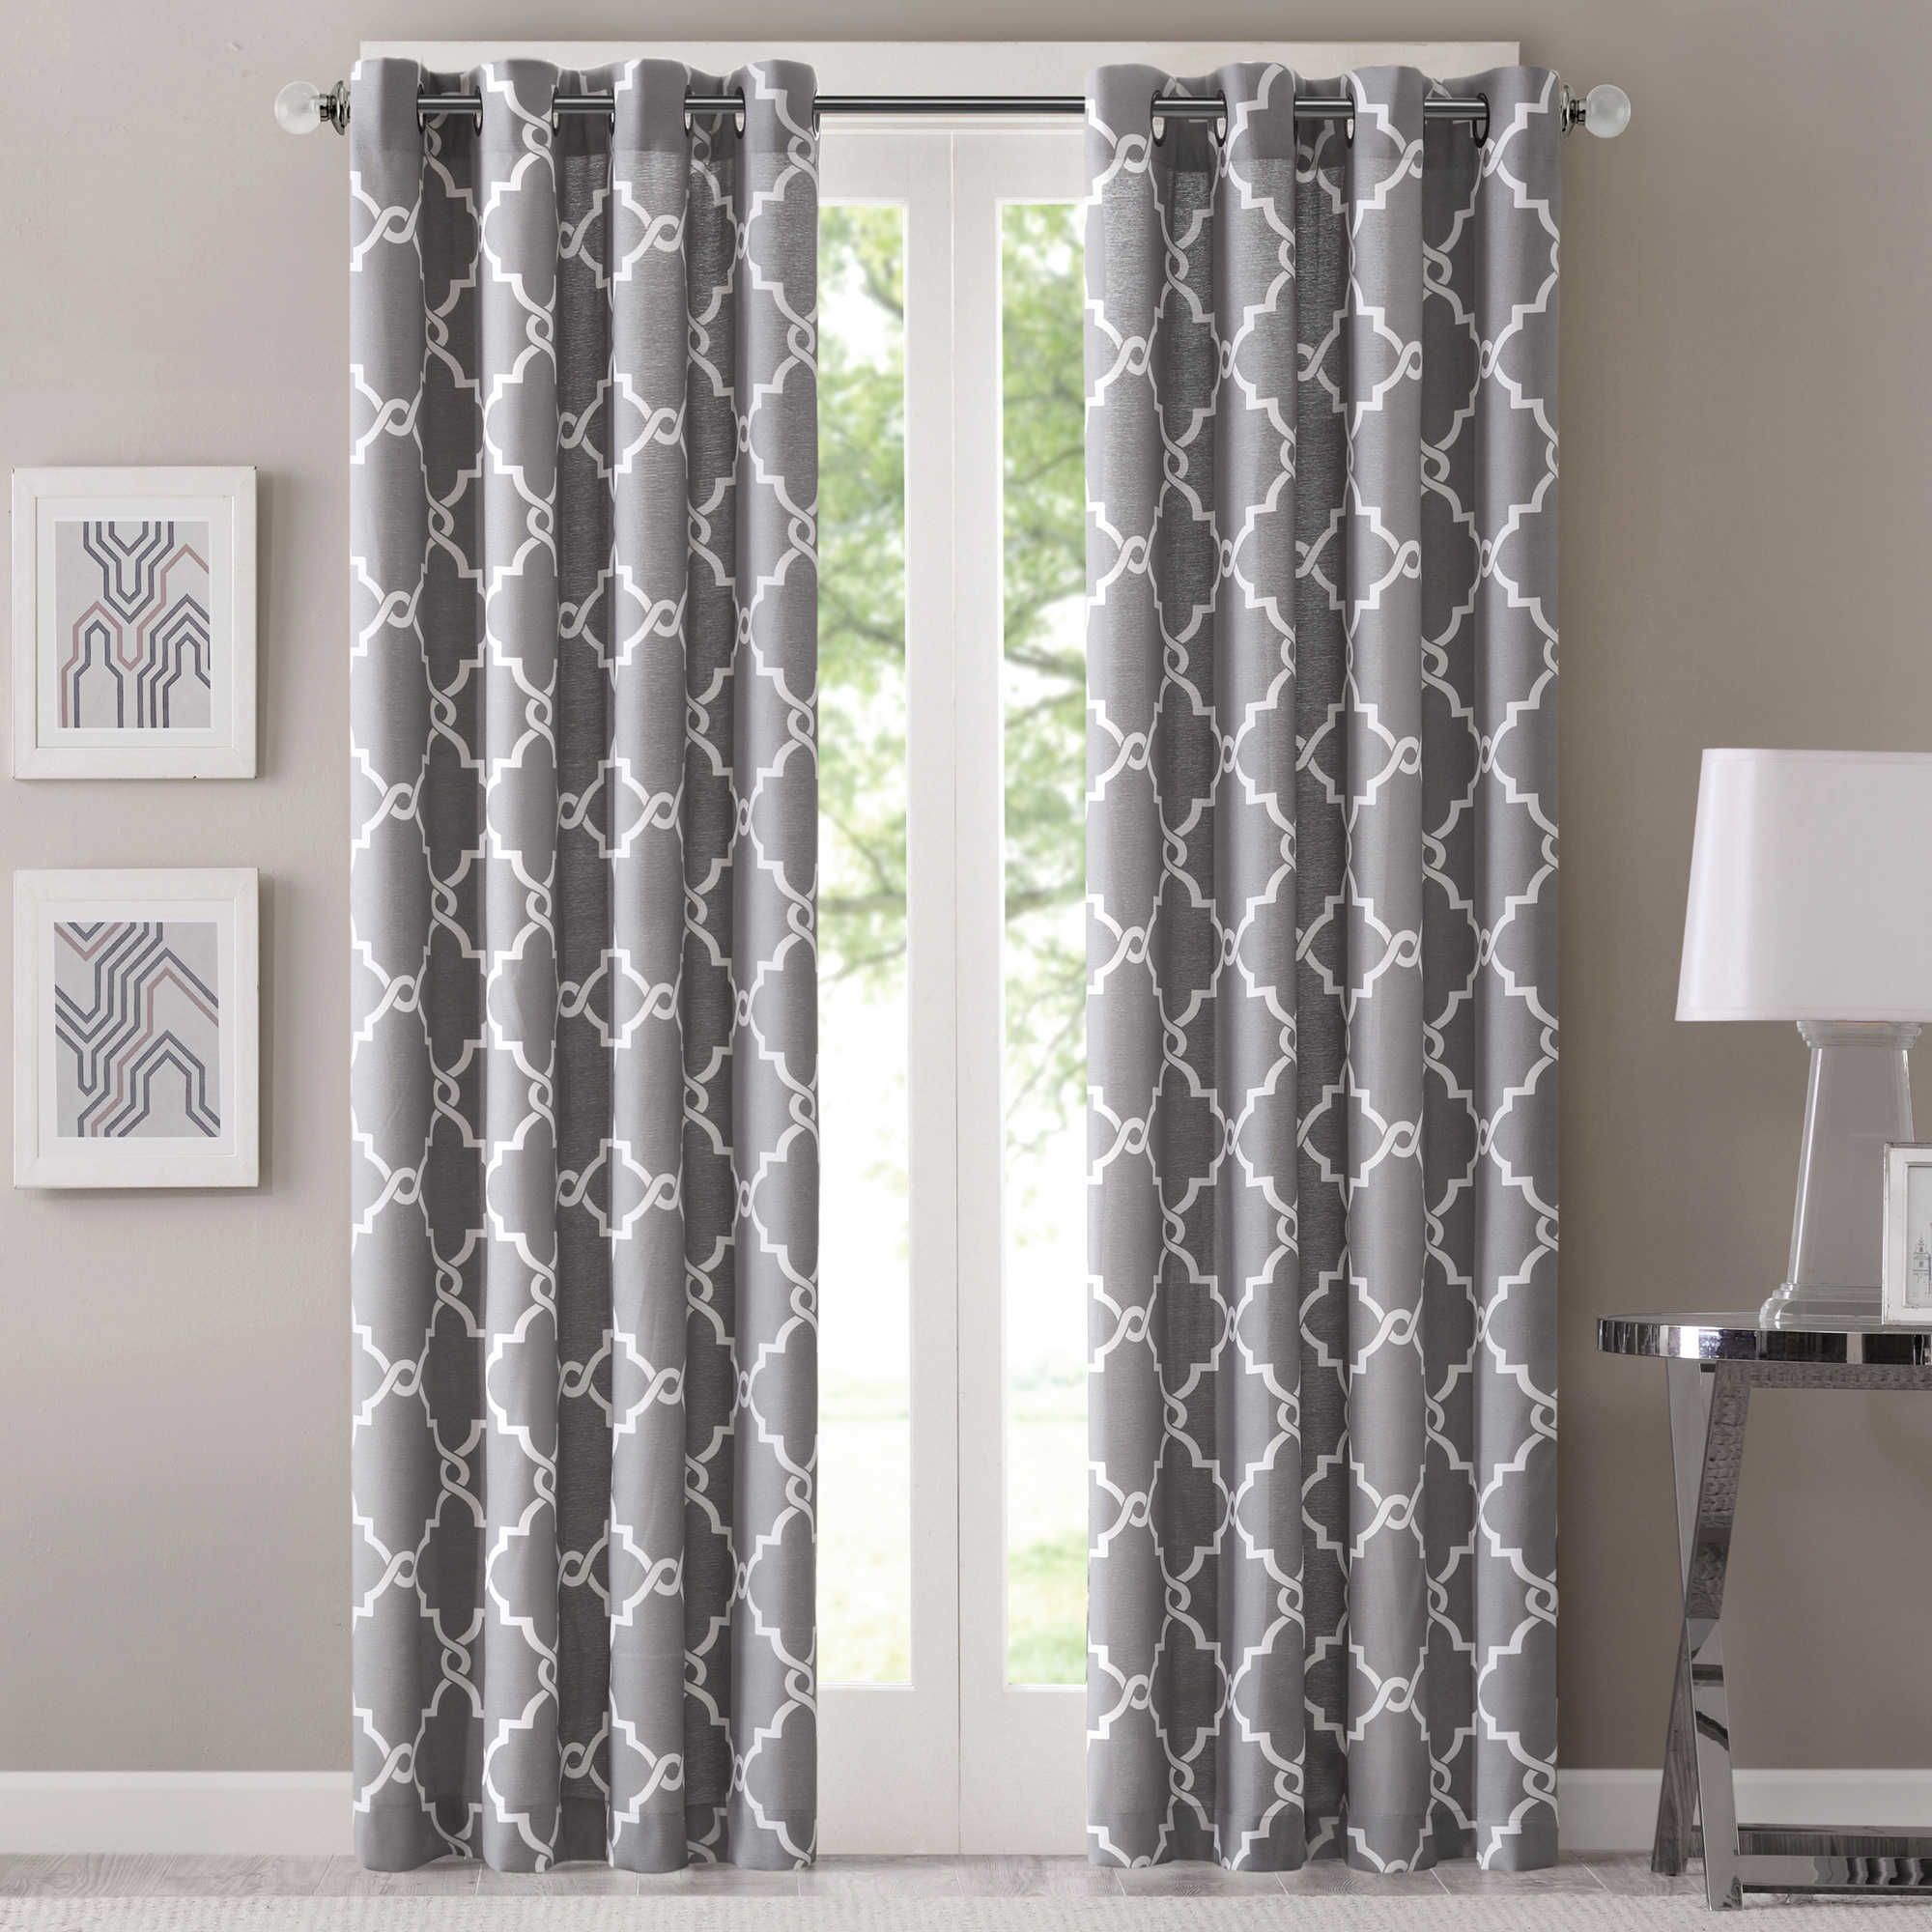 Fretwork 95 Inch Window Curtain Panel In Grey | Curtains Intended For Pastel Damask Printed Room Darkening Kitchen Tiers (View 11 of 20)